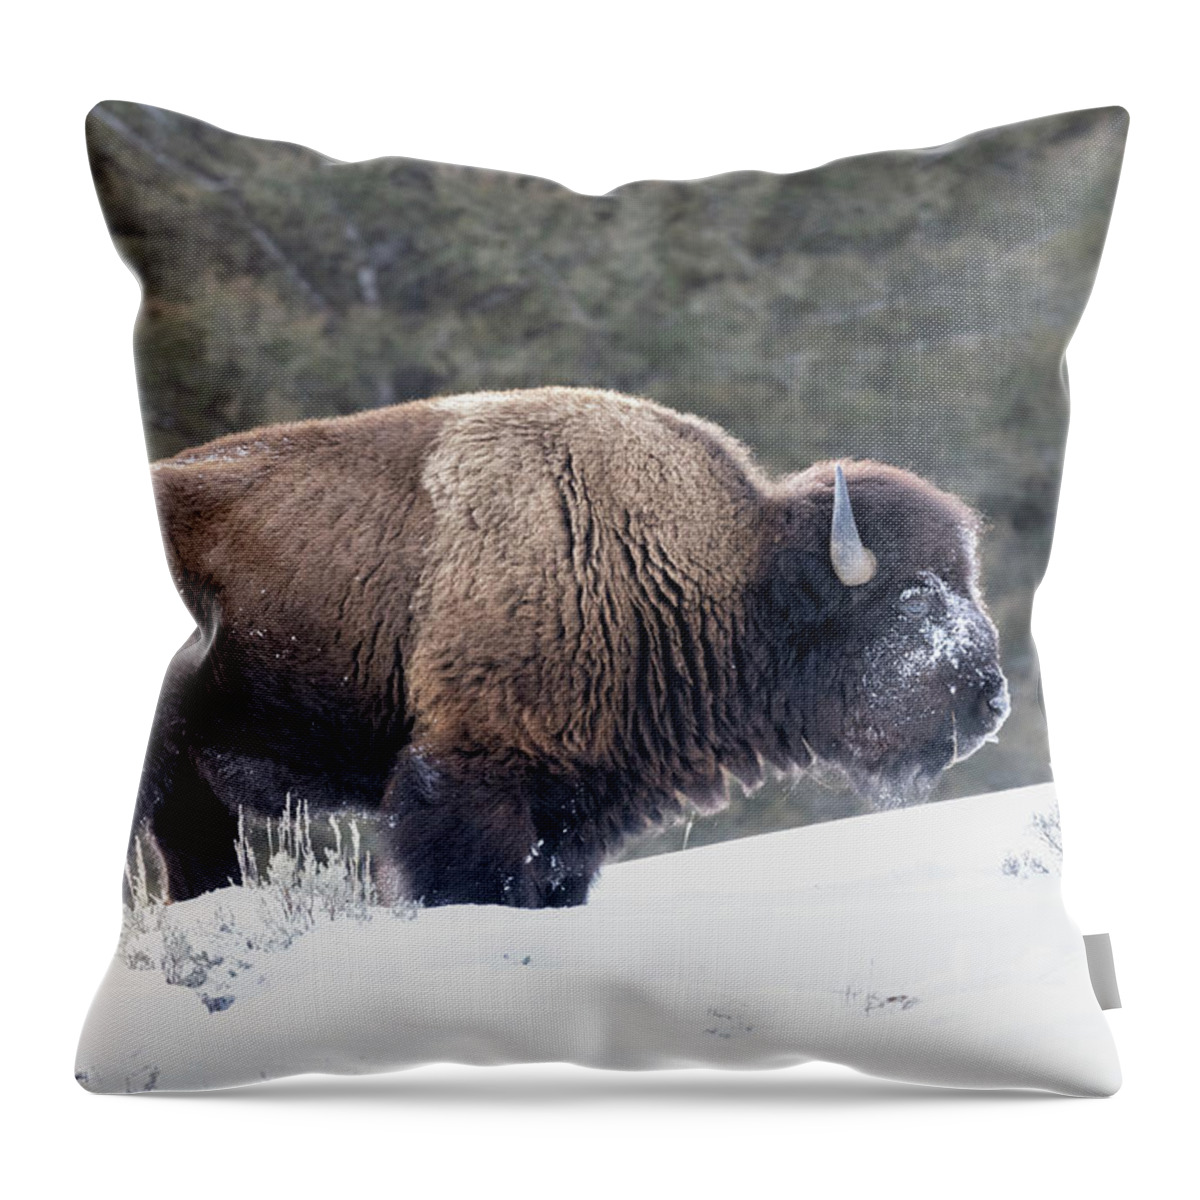 Yellowstone National Park Throw Pillow featuring the photograph Bison Outstanding by Cheryl Strahl